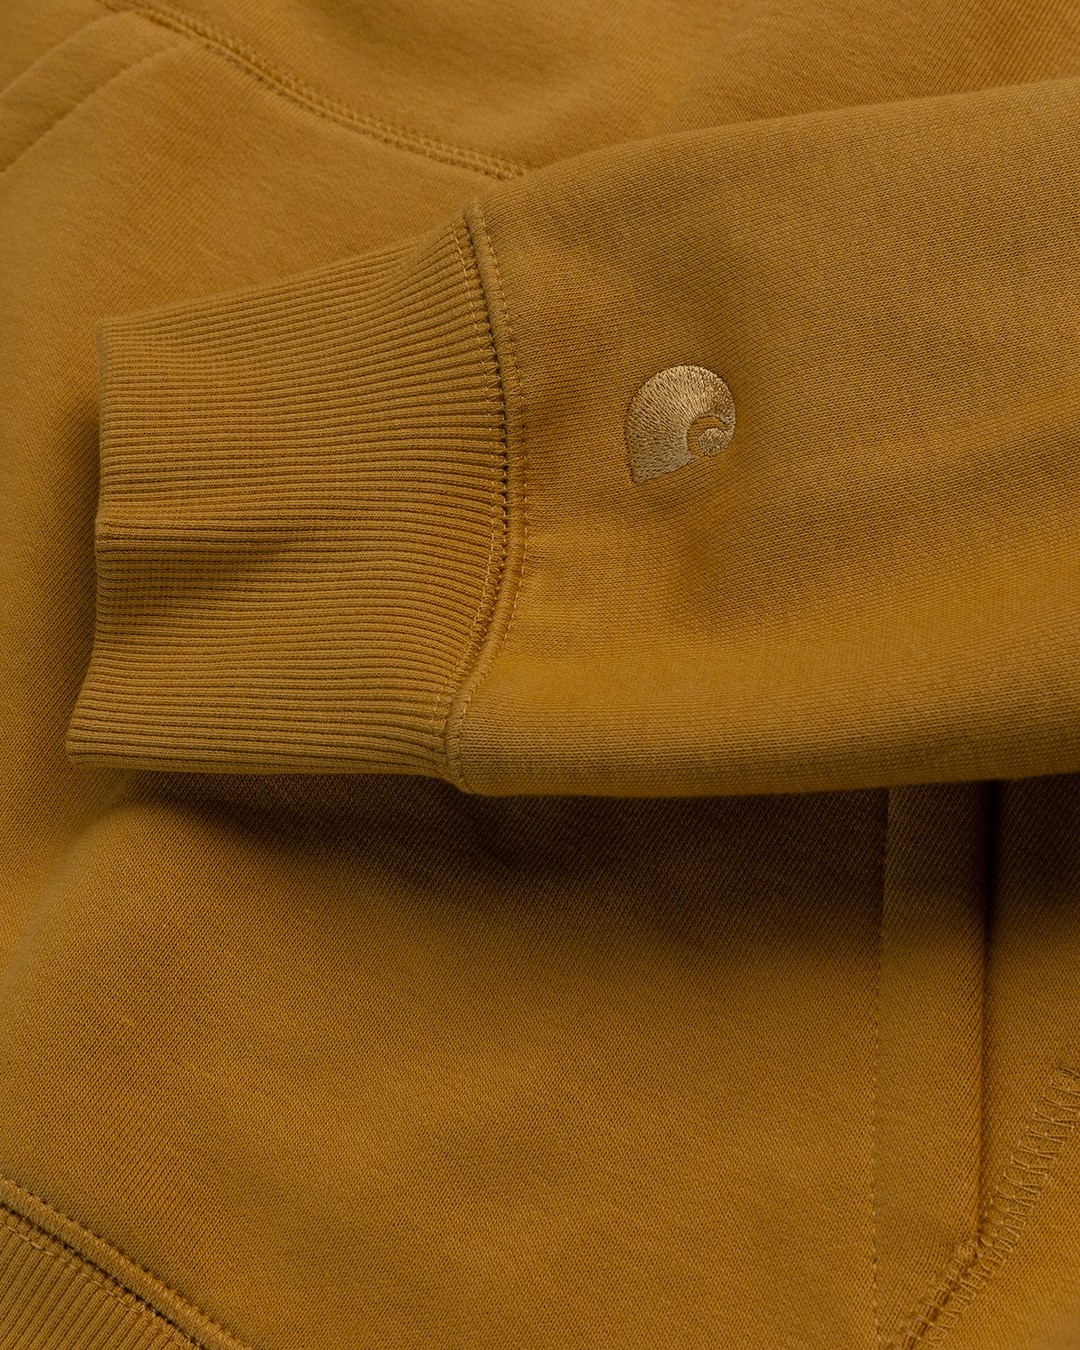 Carhartt WIP – Hooded Chase Sweat Gold - Sweats - Brown - Image 3